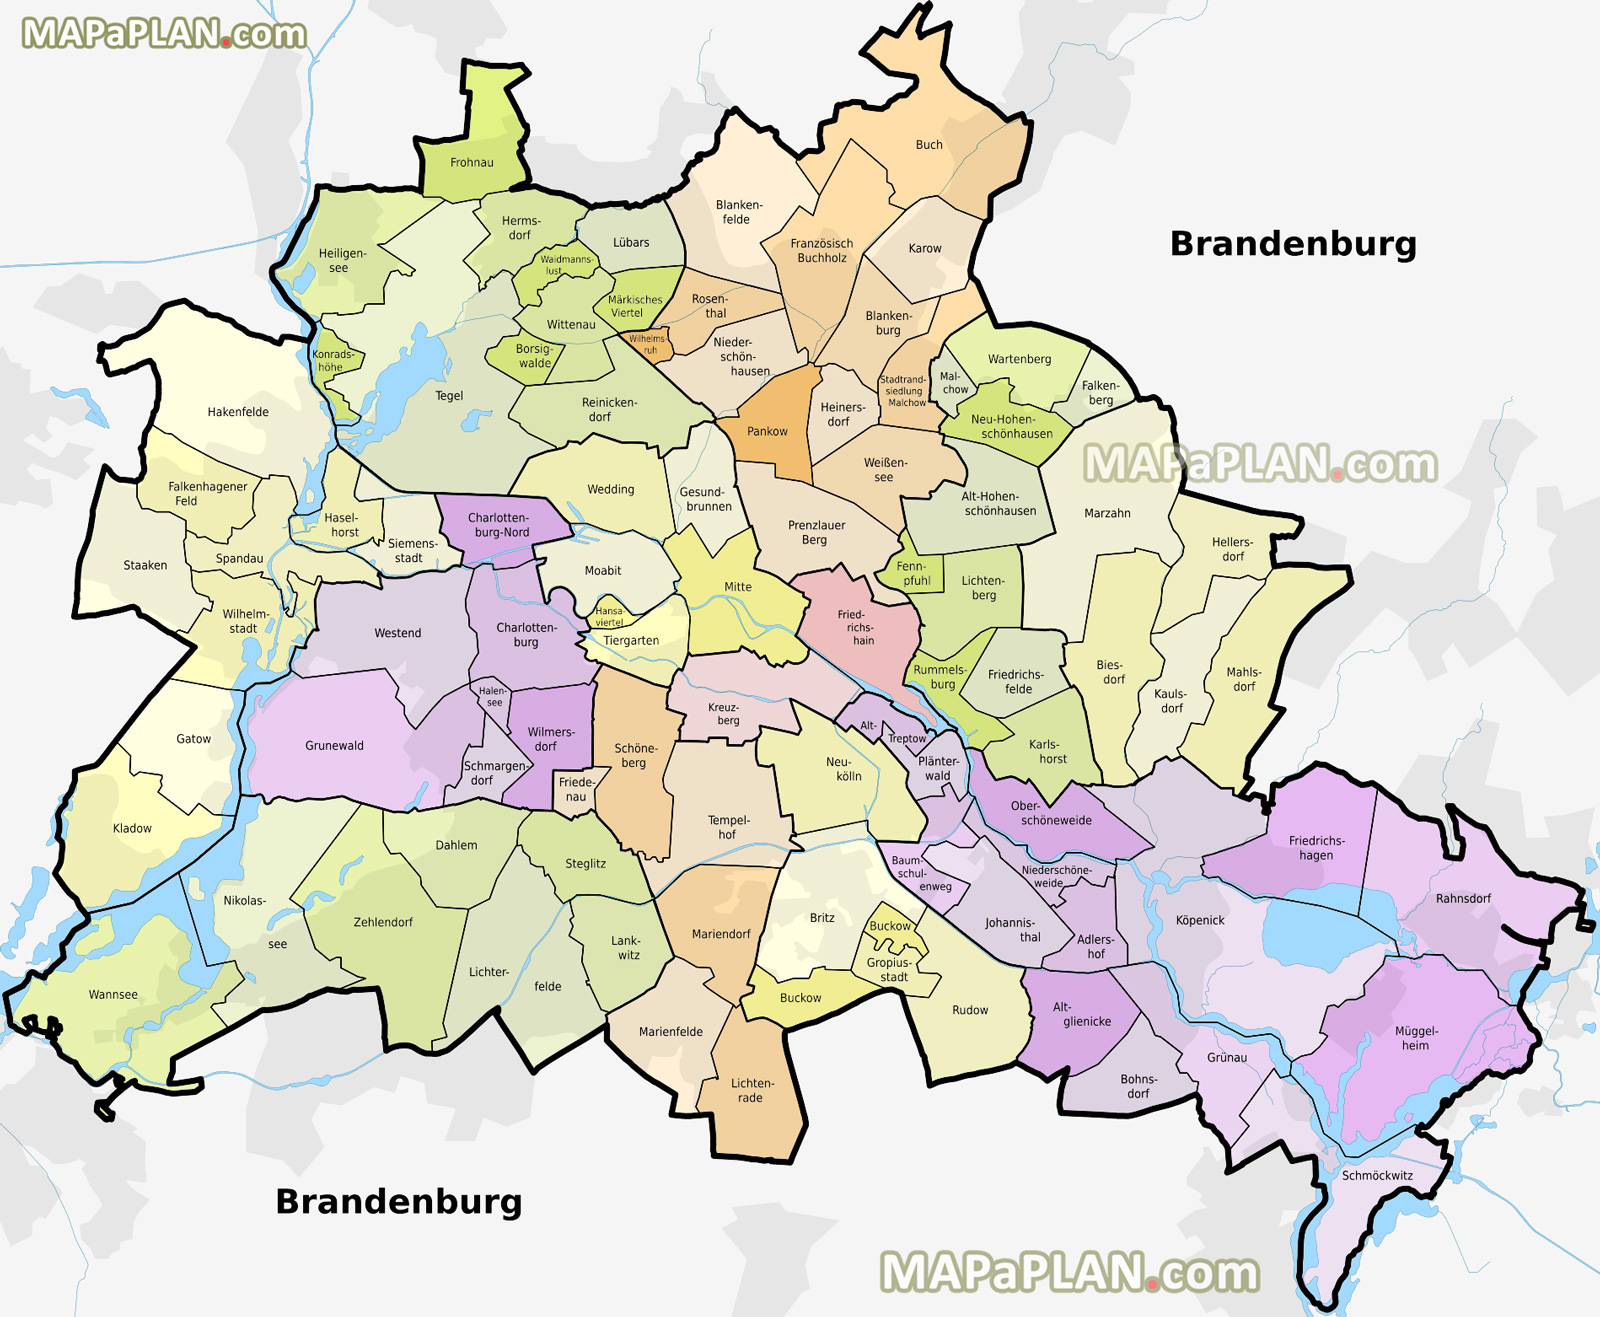 berlin-map-diagram-of-districts-boroughs-neighbourhoods-administrative-division-areas-e-g